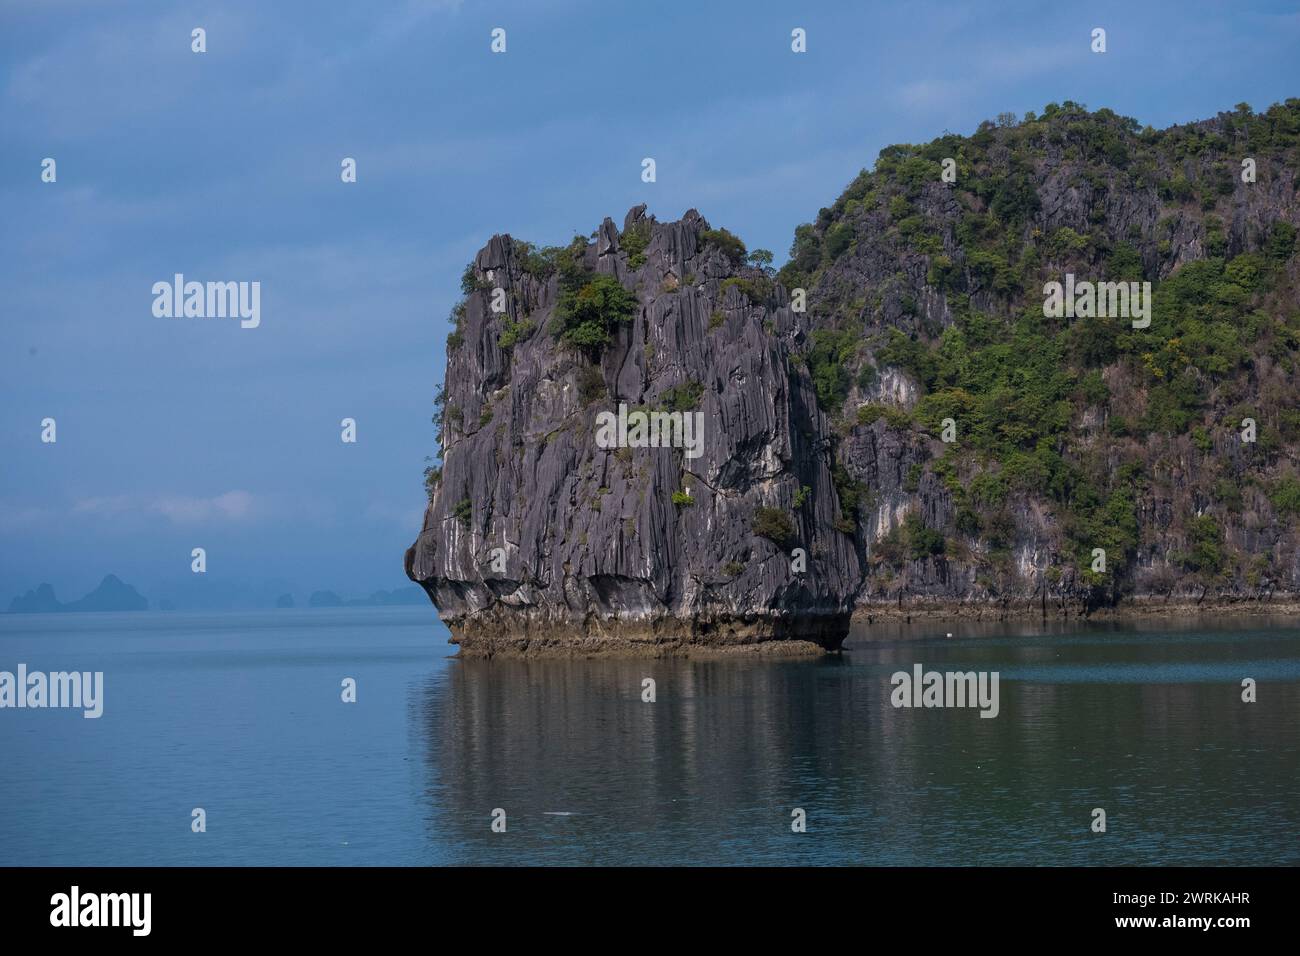 A limestone karst island emerges from the emerald waters of Halong Bay, Vietnam. The island is a dramatic sight, its sheer cliffs rising hundreds of f Stock Photo